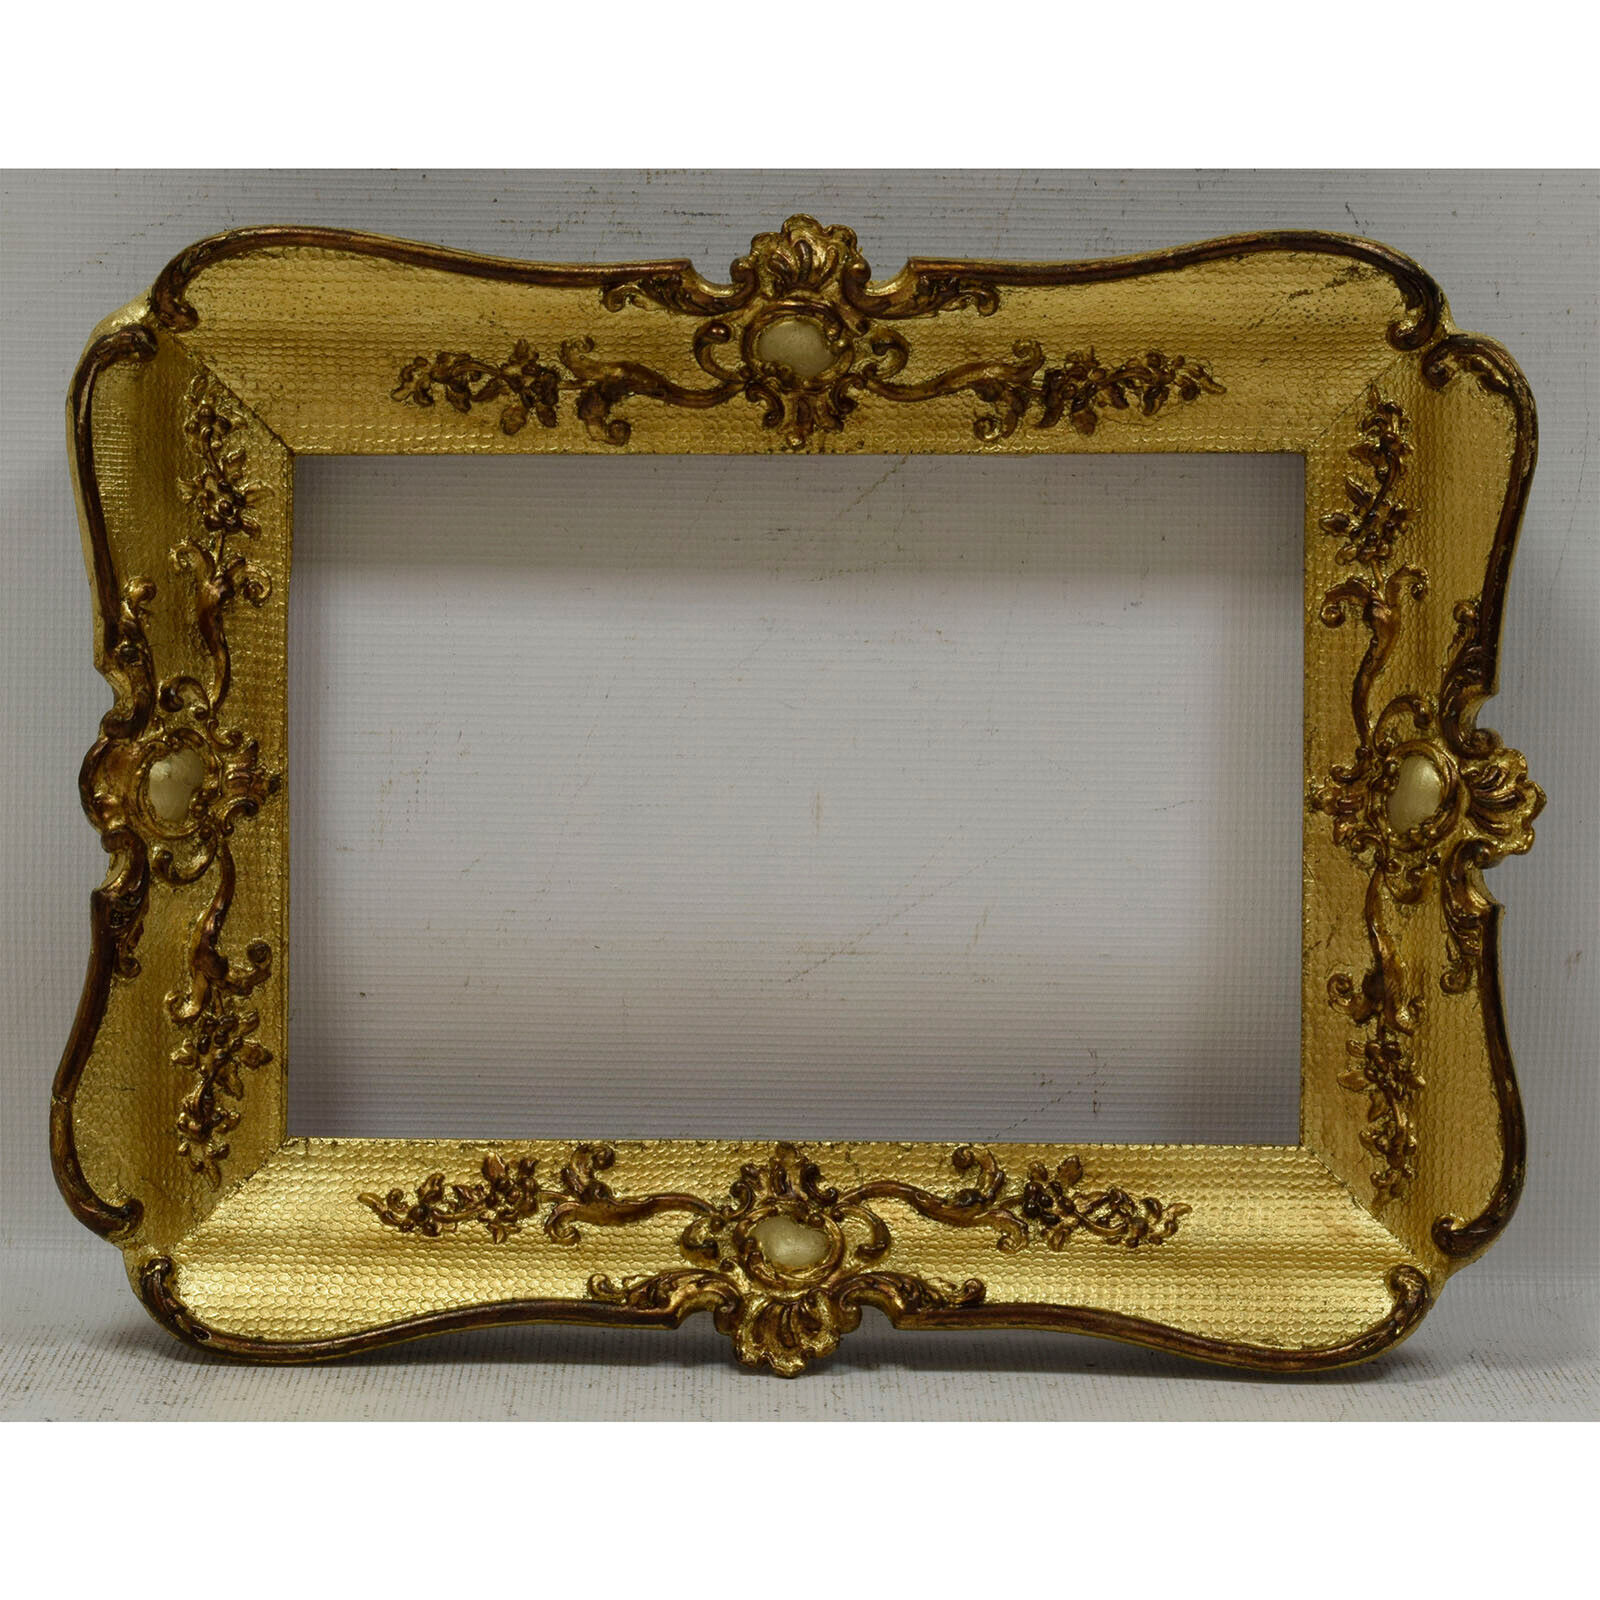 Ca 1900 Old wooden frame decorative with metal leaf Internal: 13,1x9 in